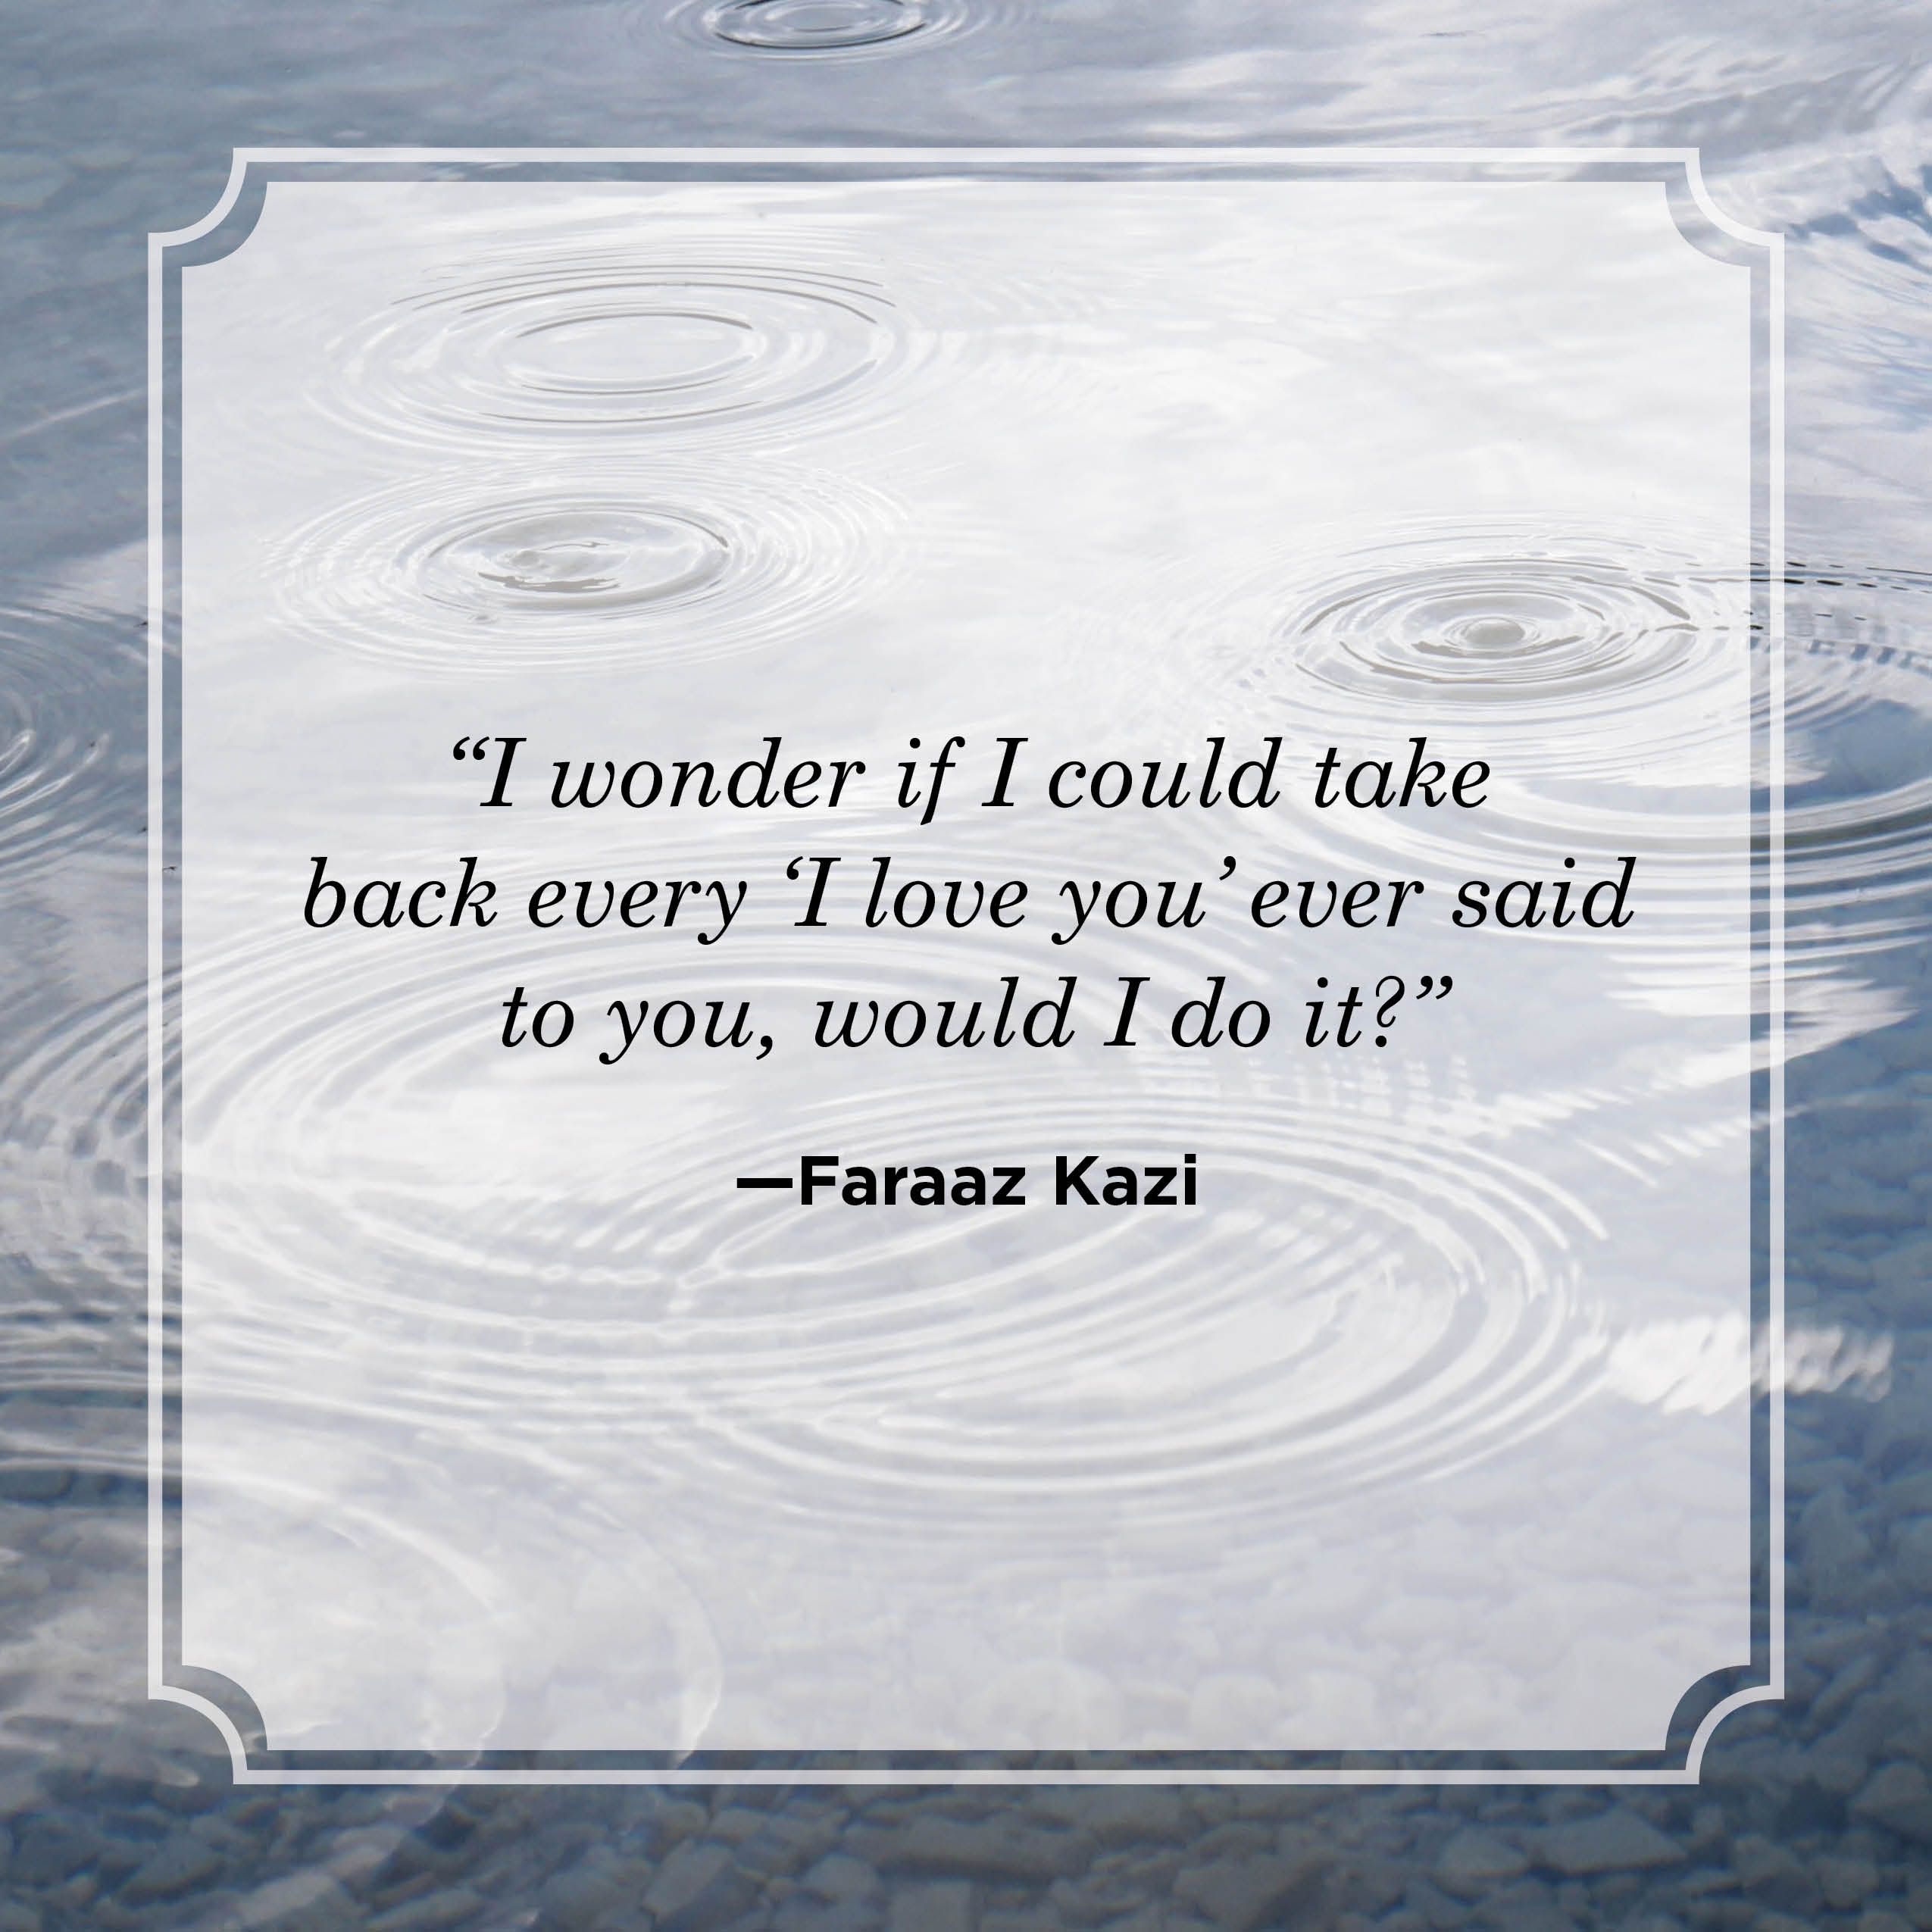 25 Sad Love Quotes - Sad Quotes About Love and Pain